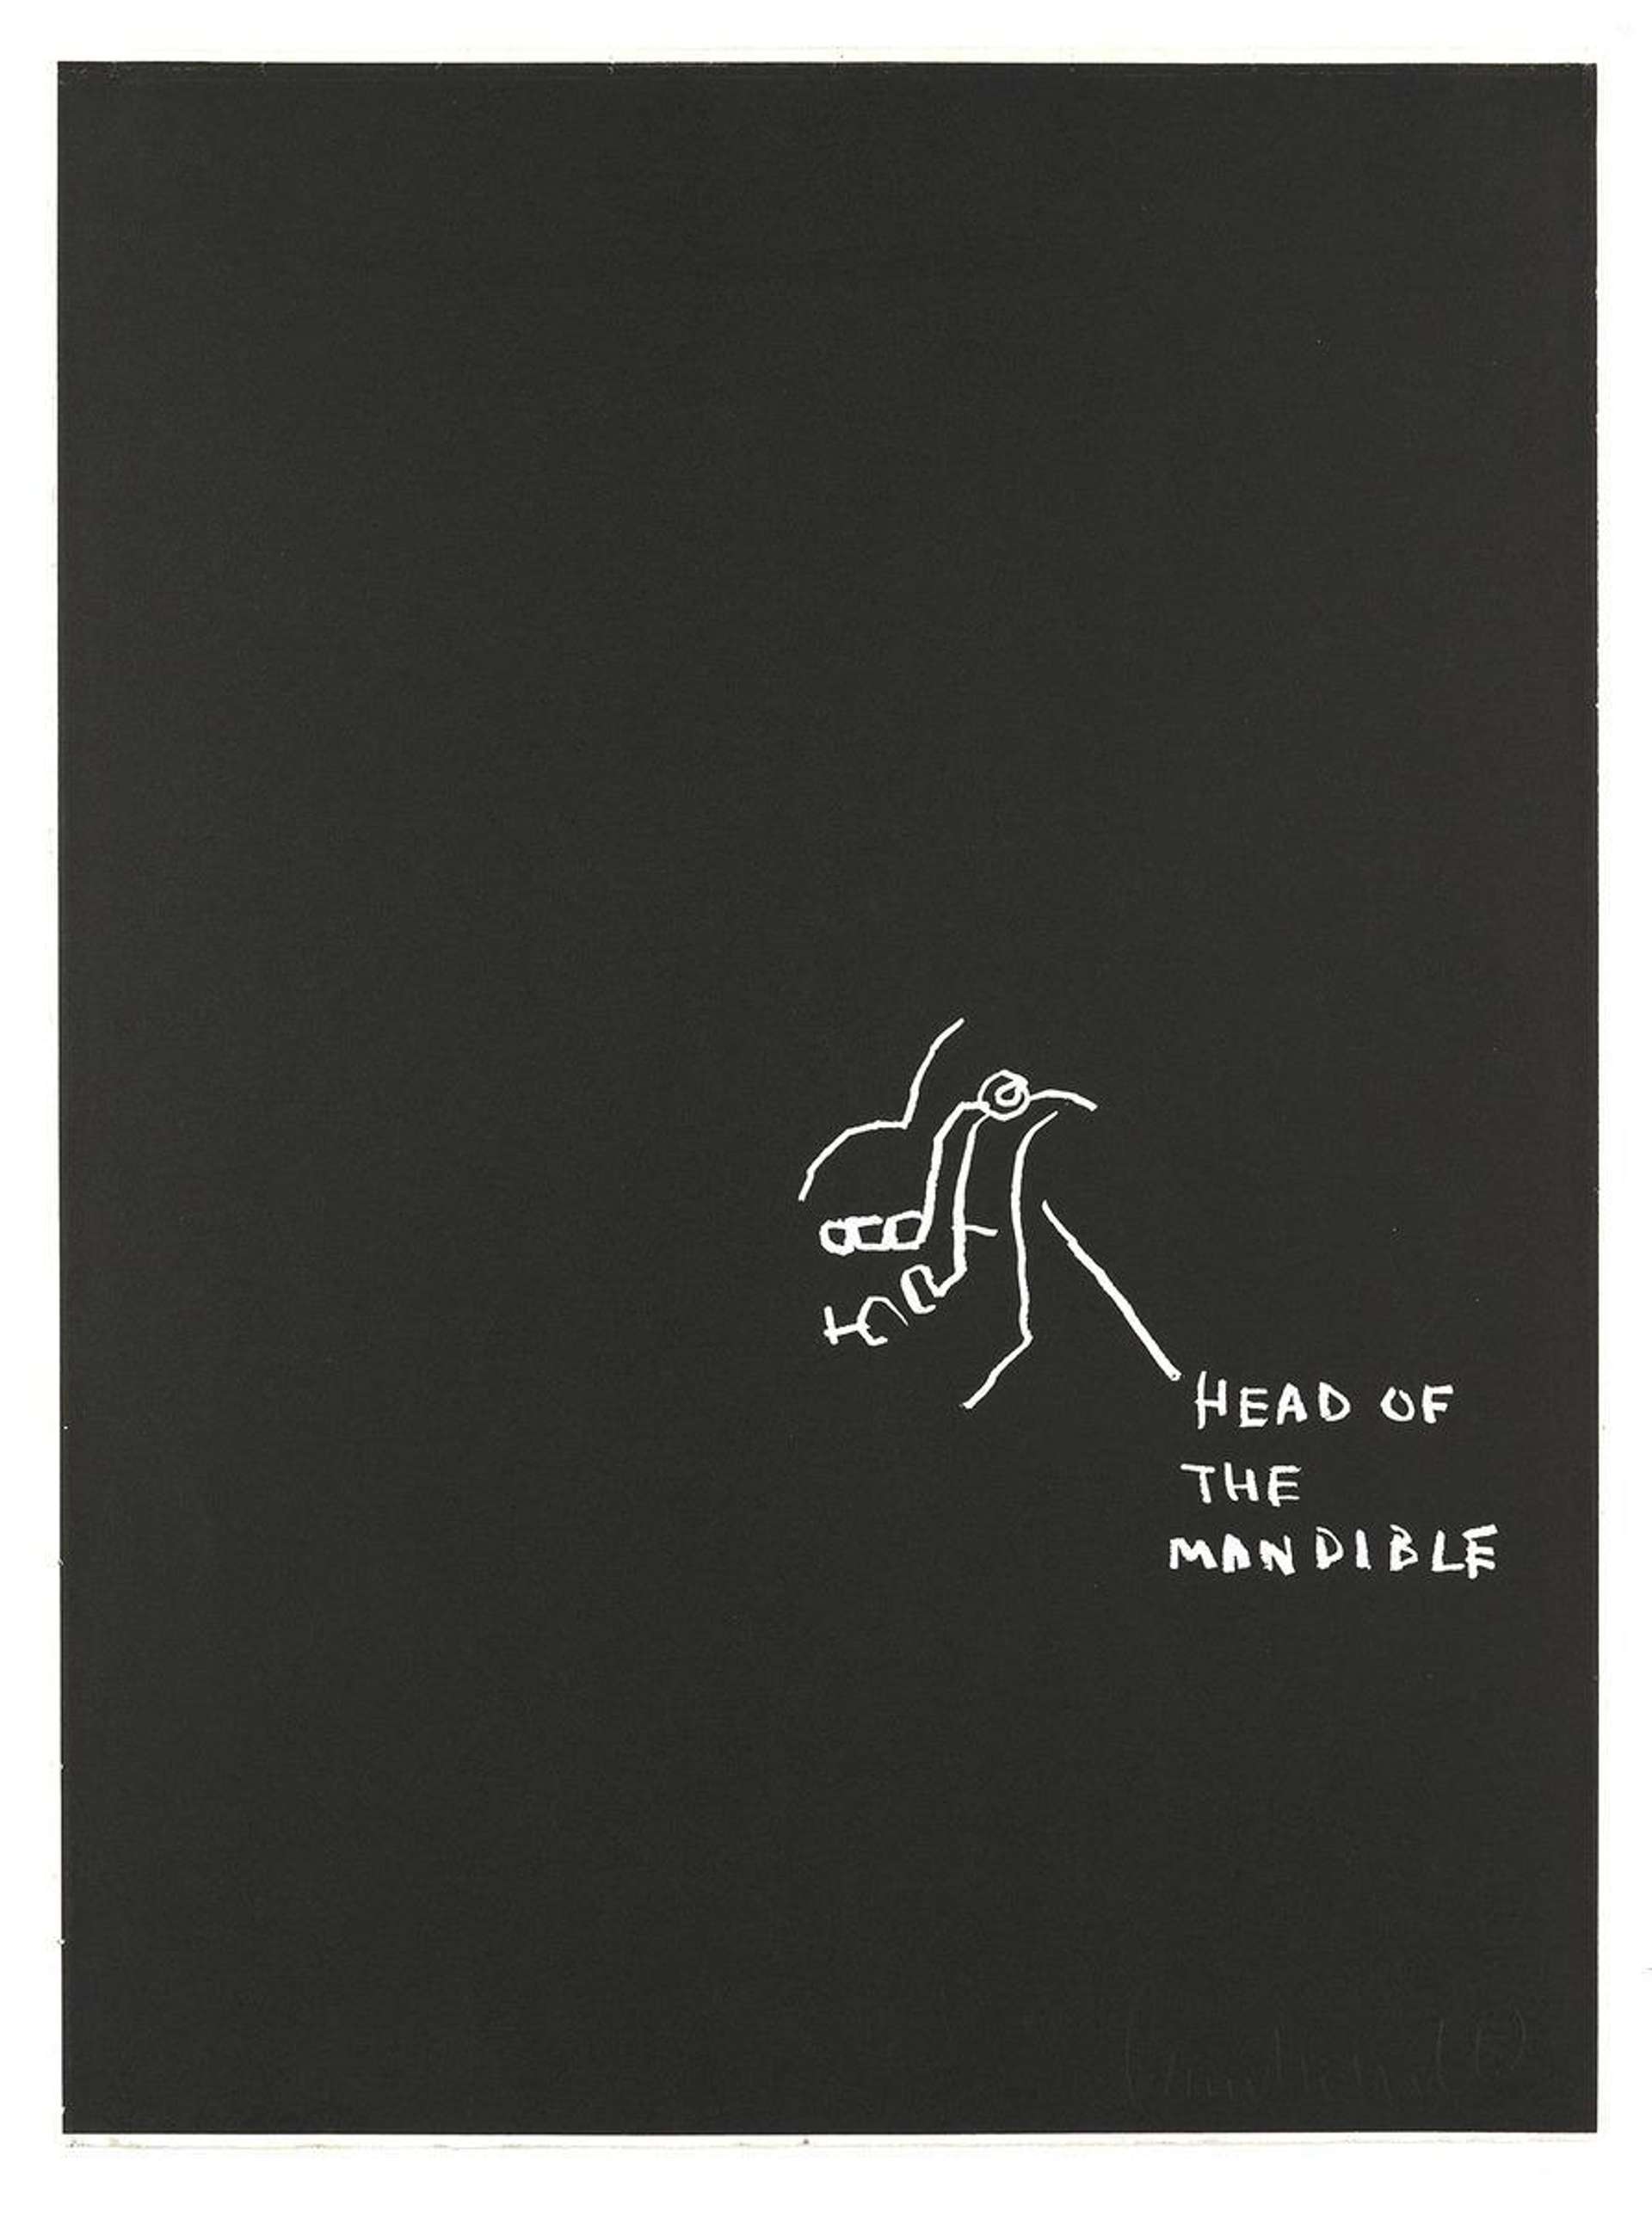 A monochrome print by Basquiat.  The sketch is in white against a black background and done off-centre of the composition, with a single label indicating the ‘head of the mandible’. The depiction of the joint bears great similarity to the copyright sign, which can be seen throughout Basquiat’s oeuvre.